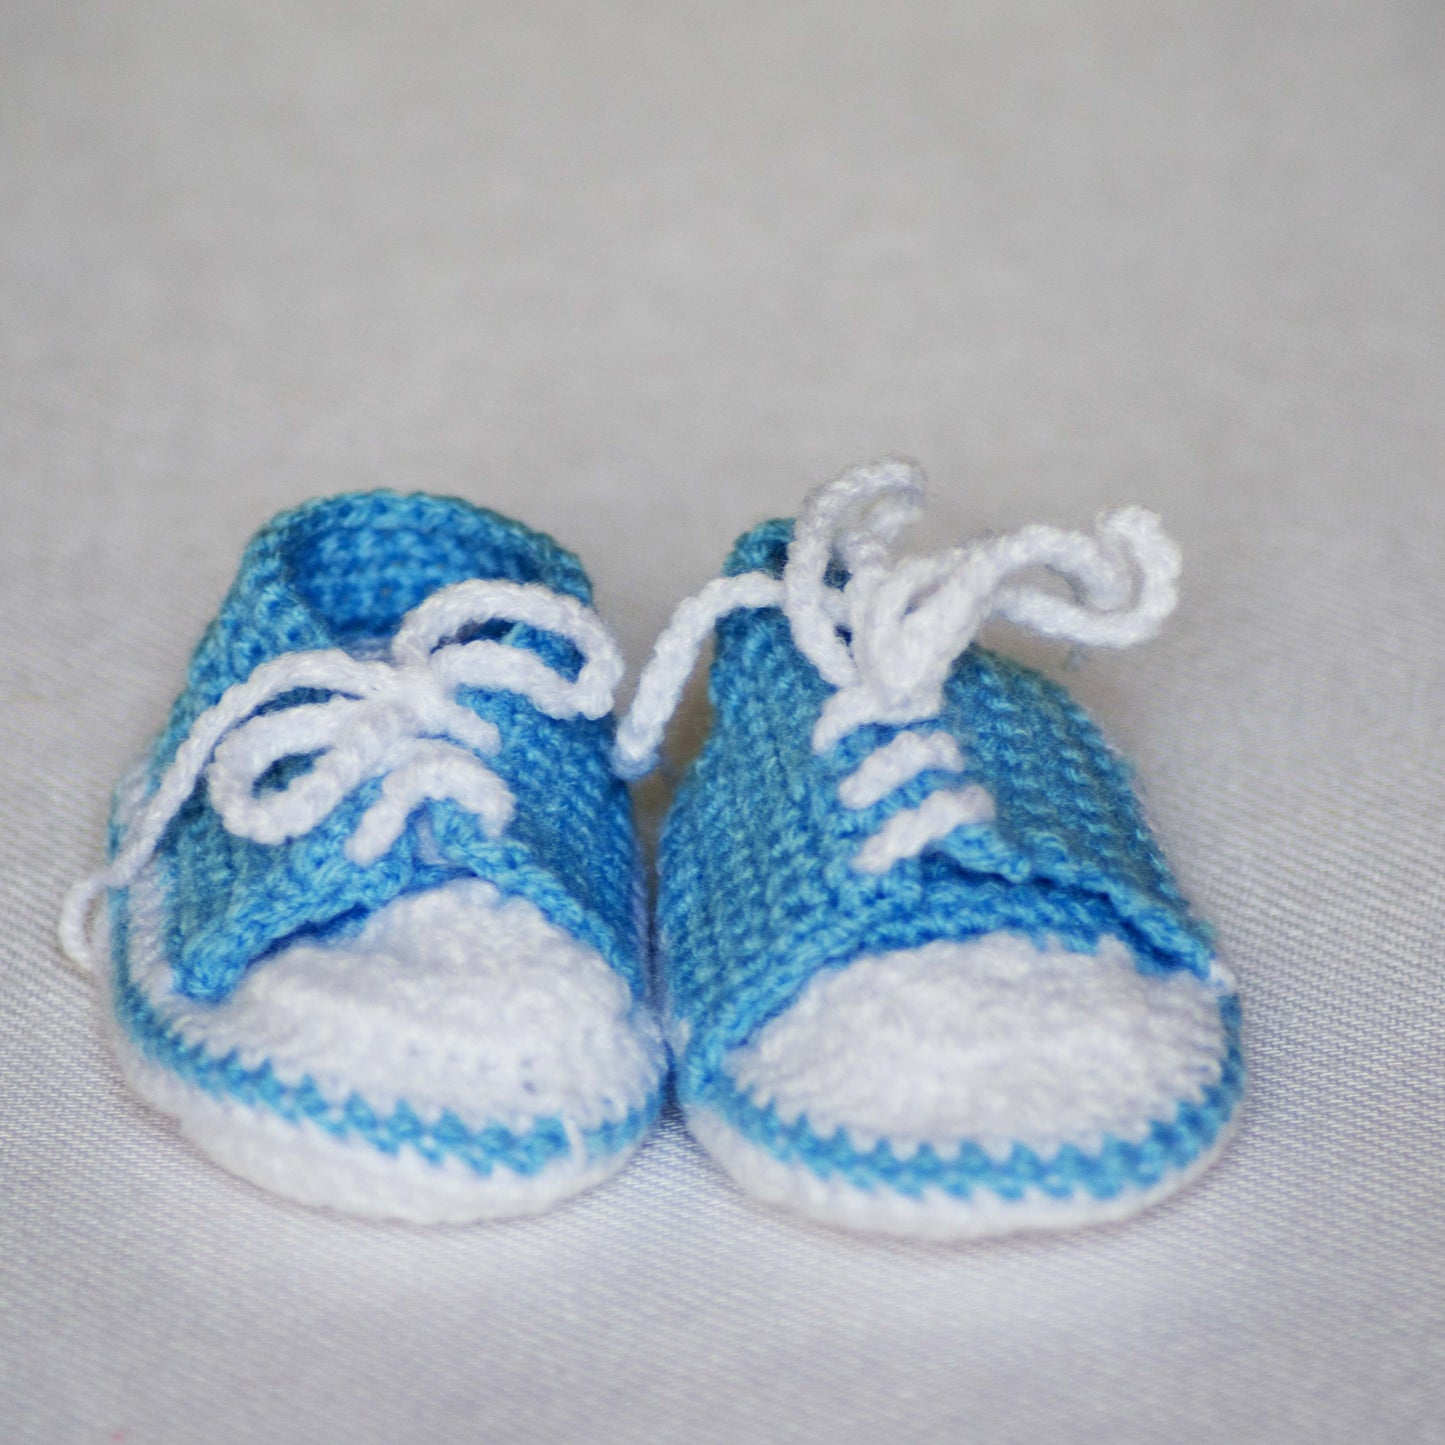 Handmade Crochet / Knitted Baby Shoes/Sandals - BabySpace Shop